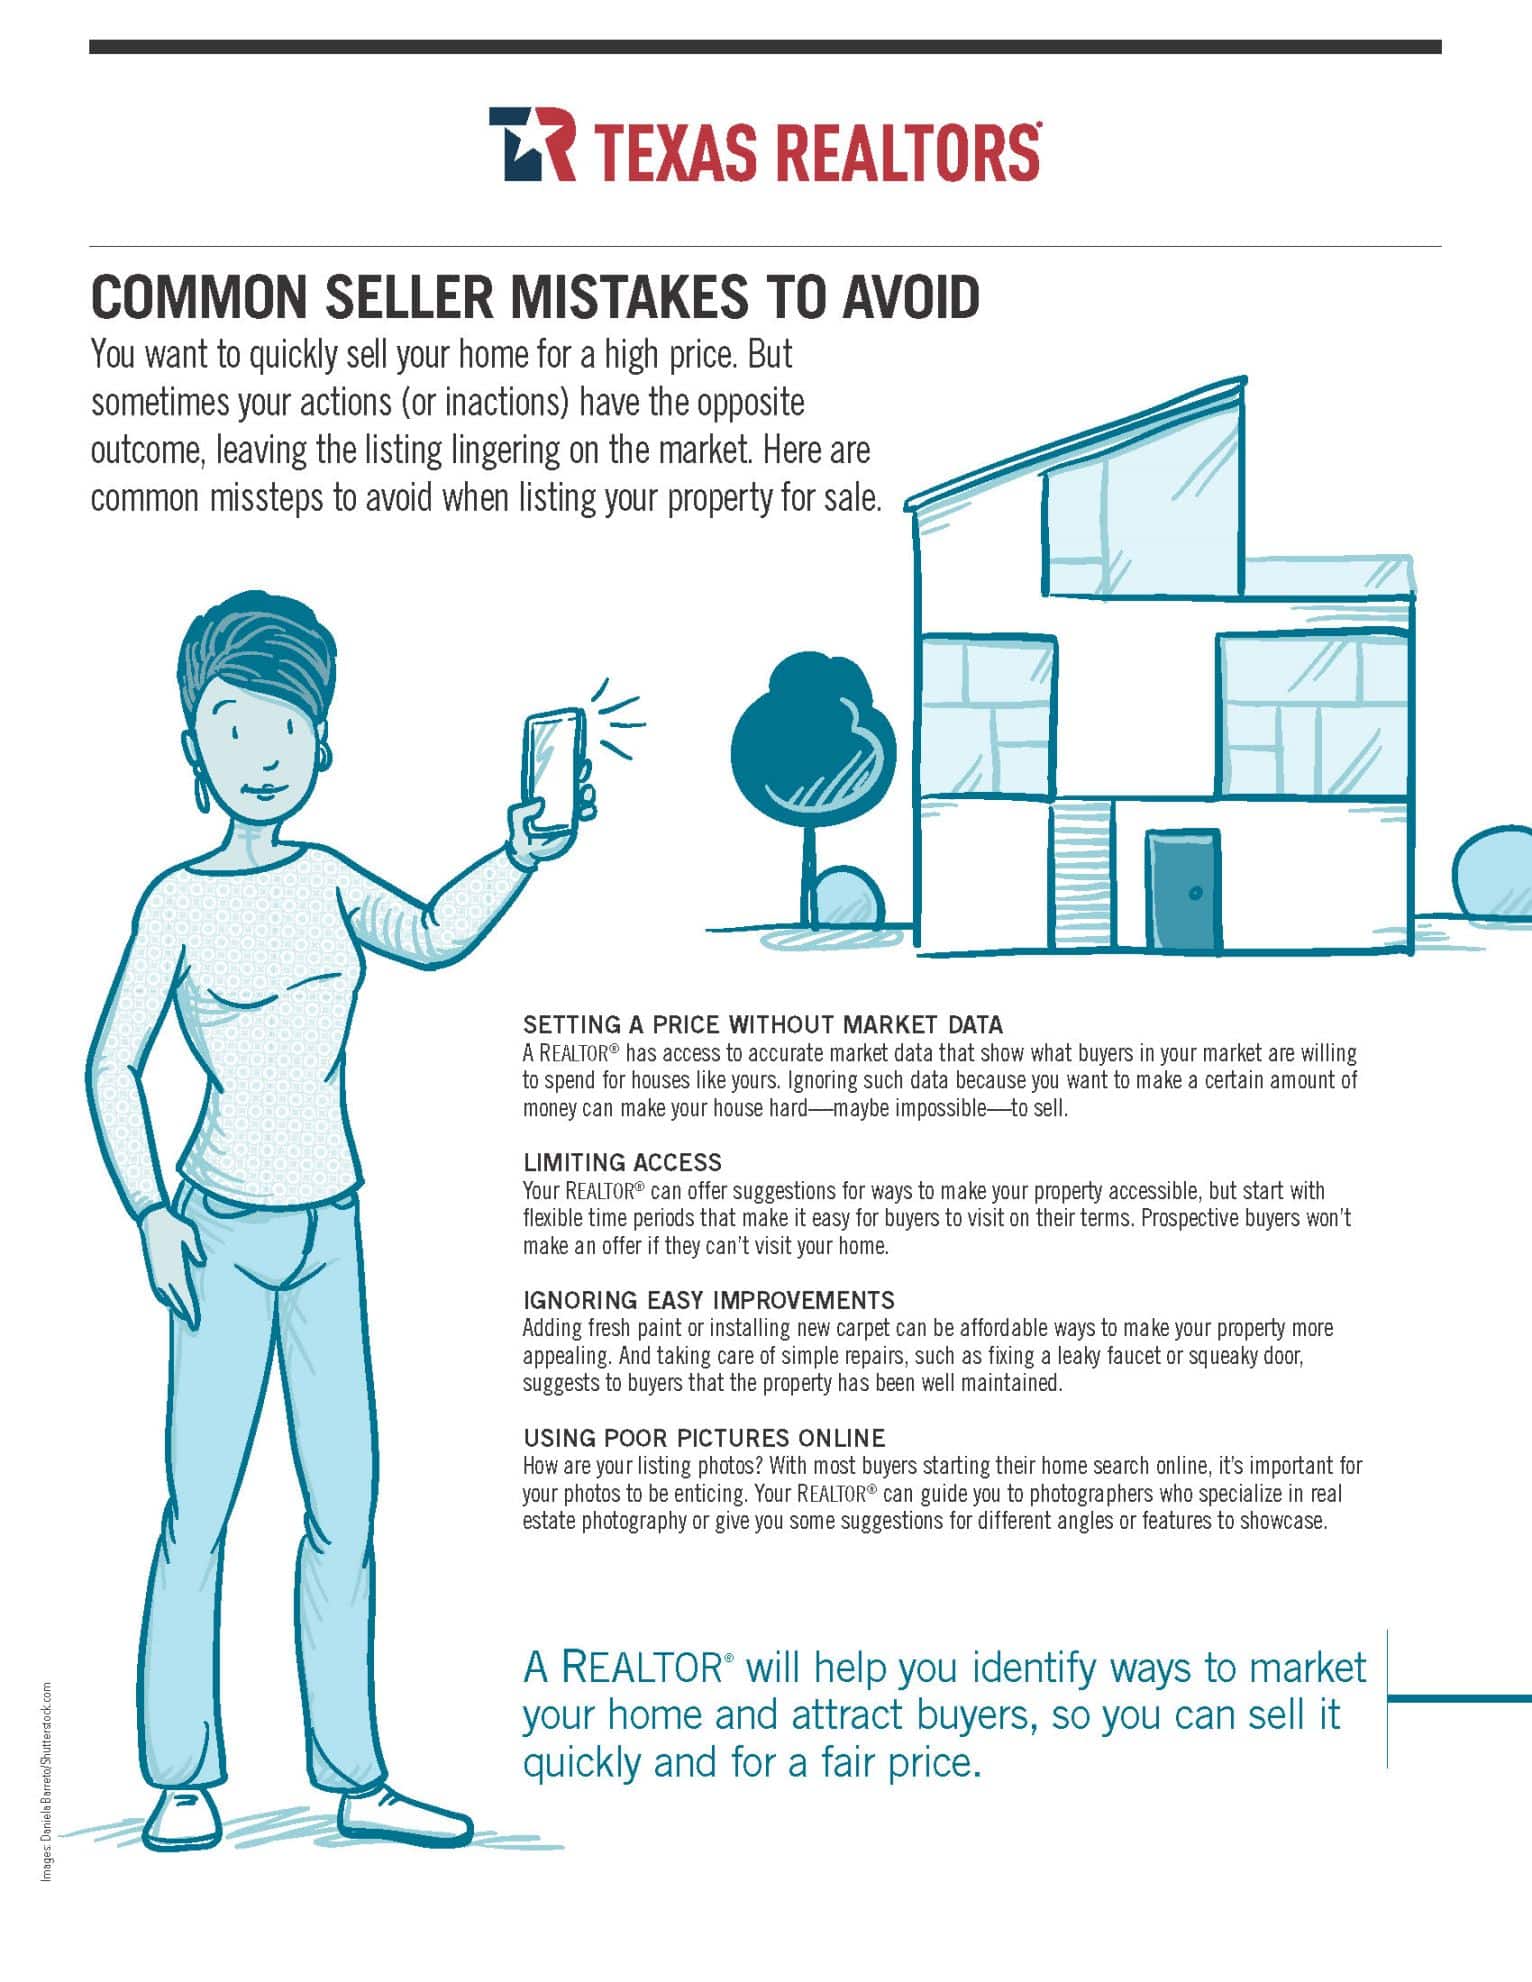 Common Seller Mistakes